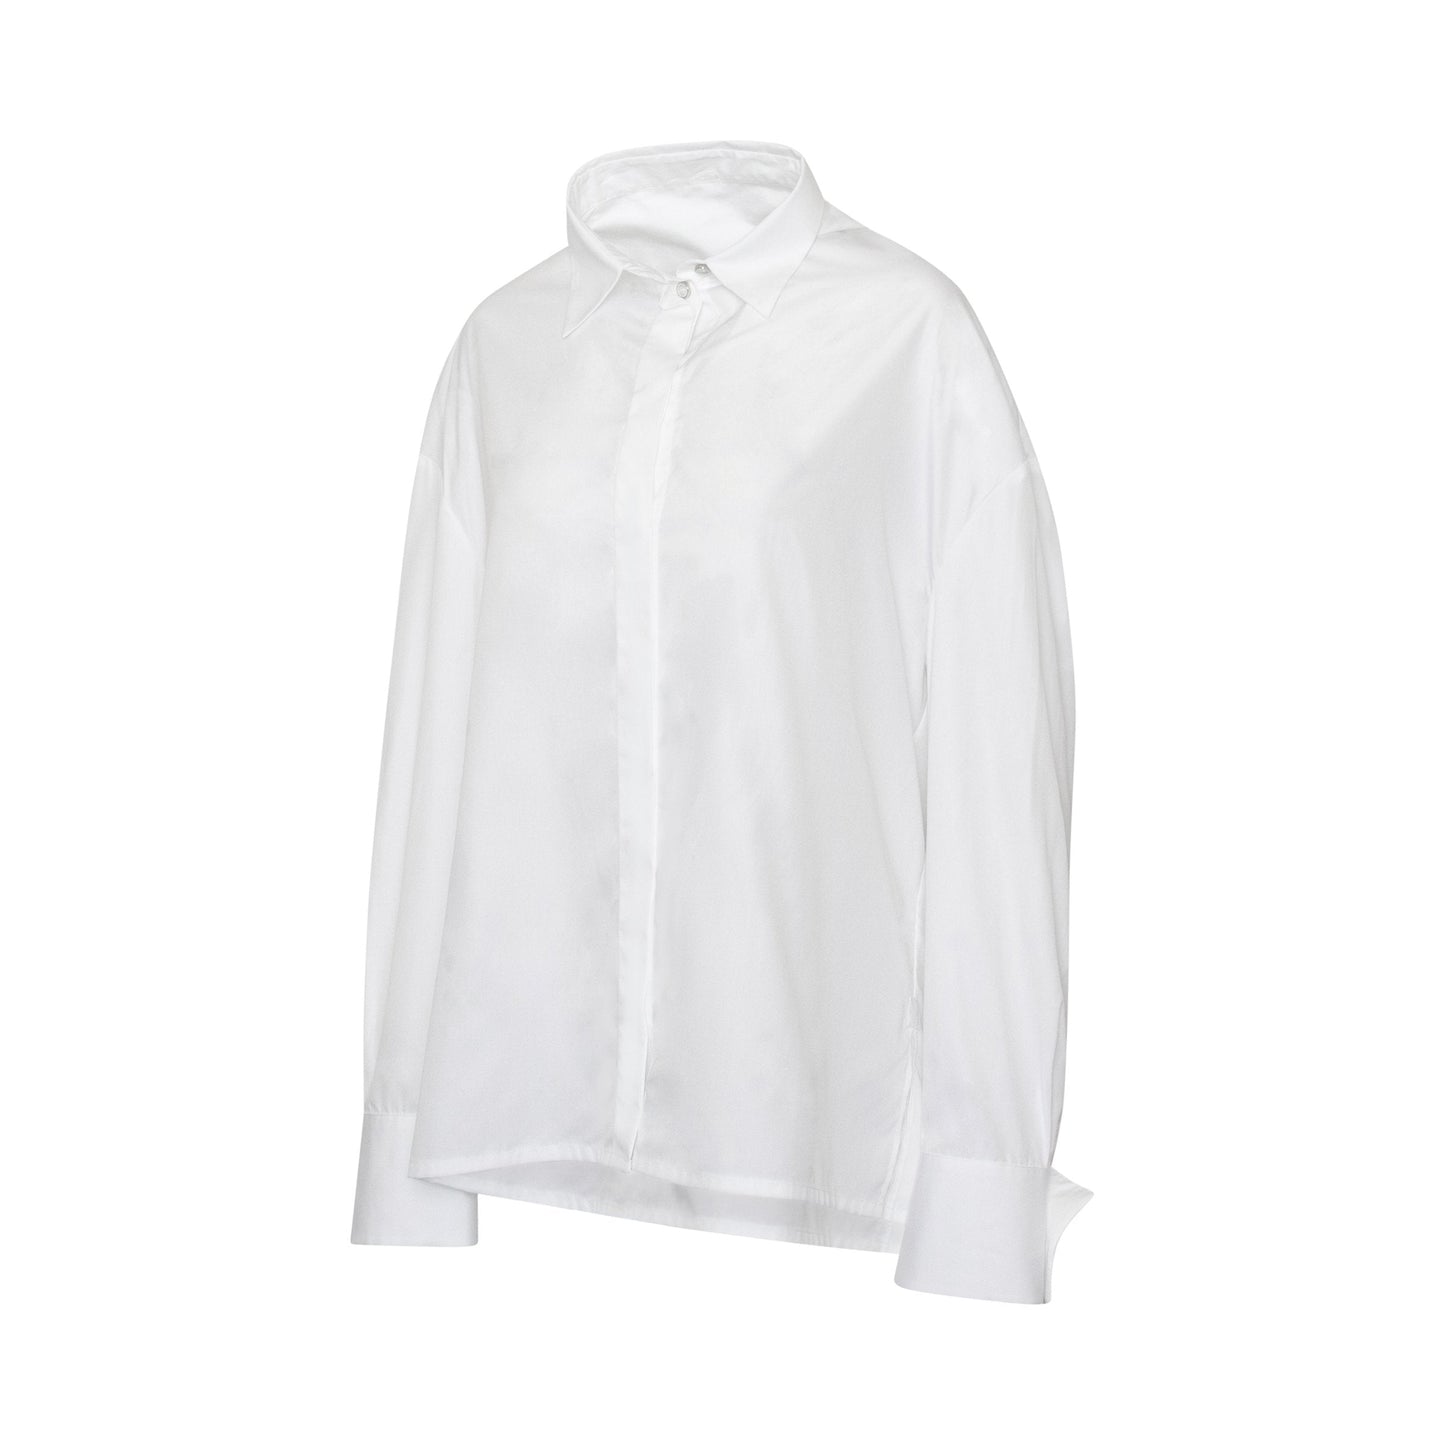 Oversized Shirt With Drapped Collar in White